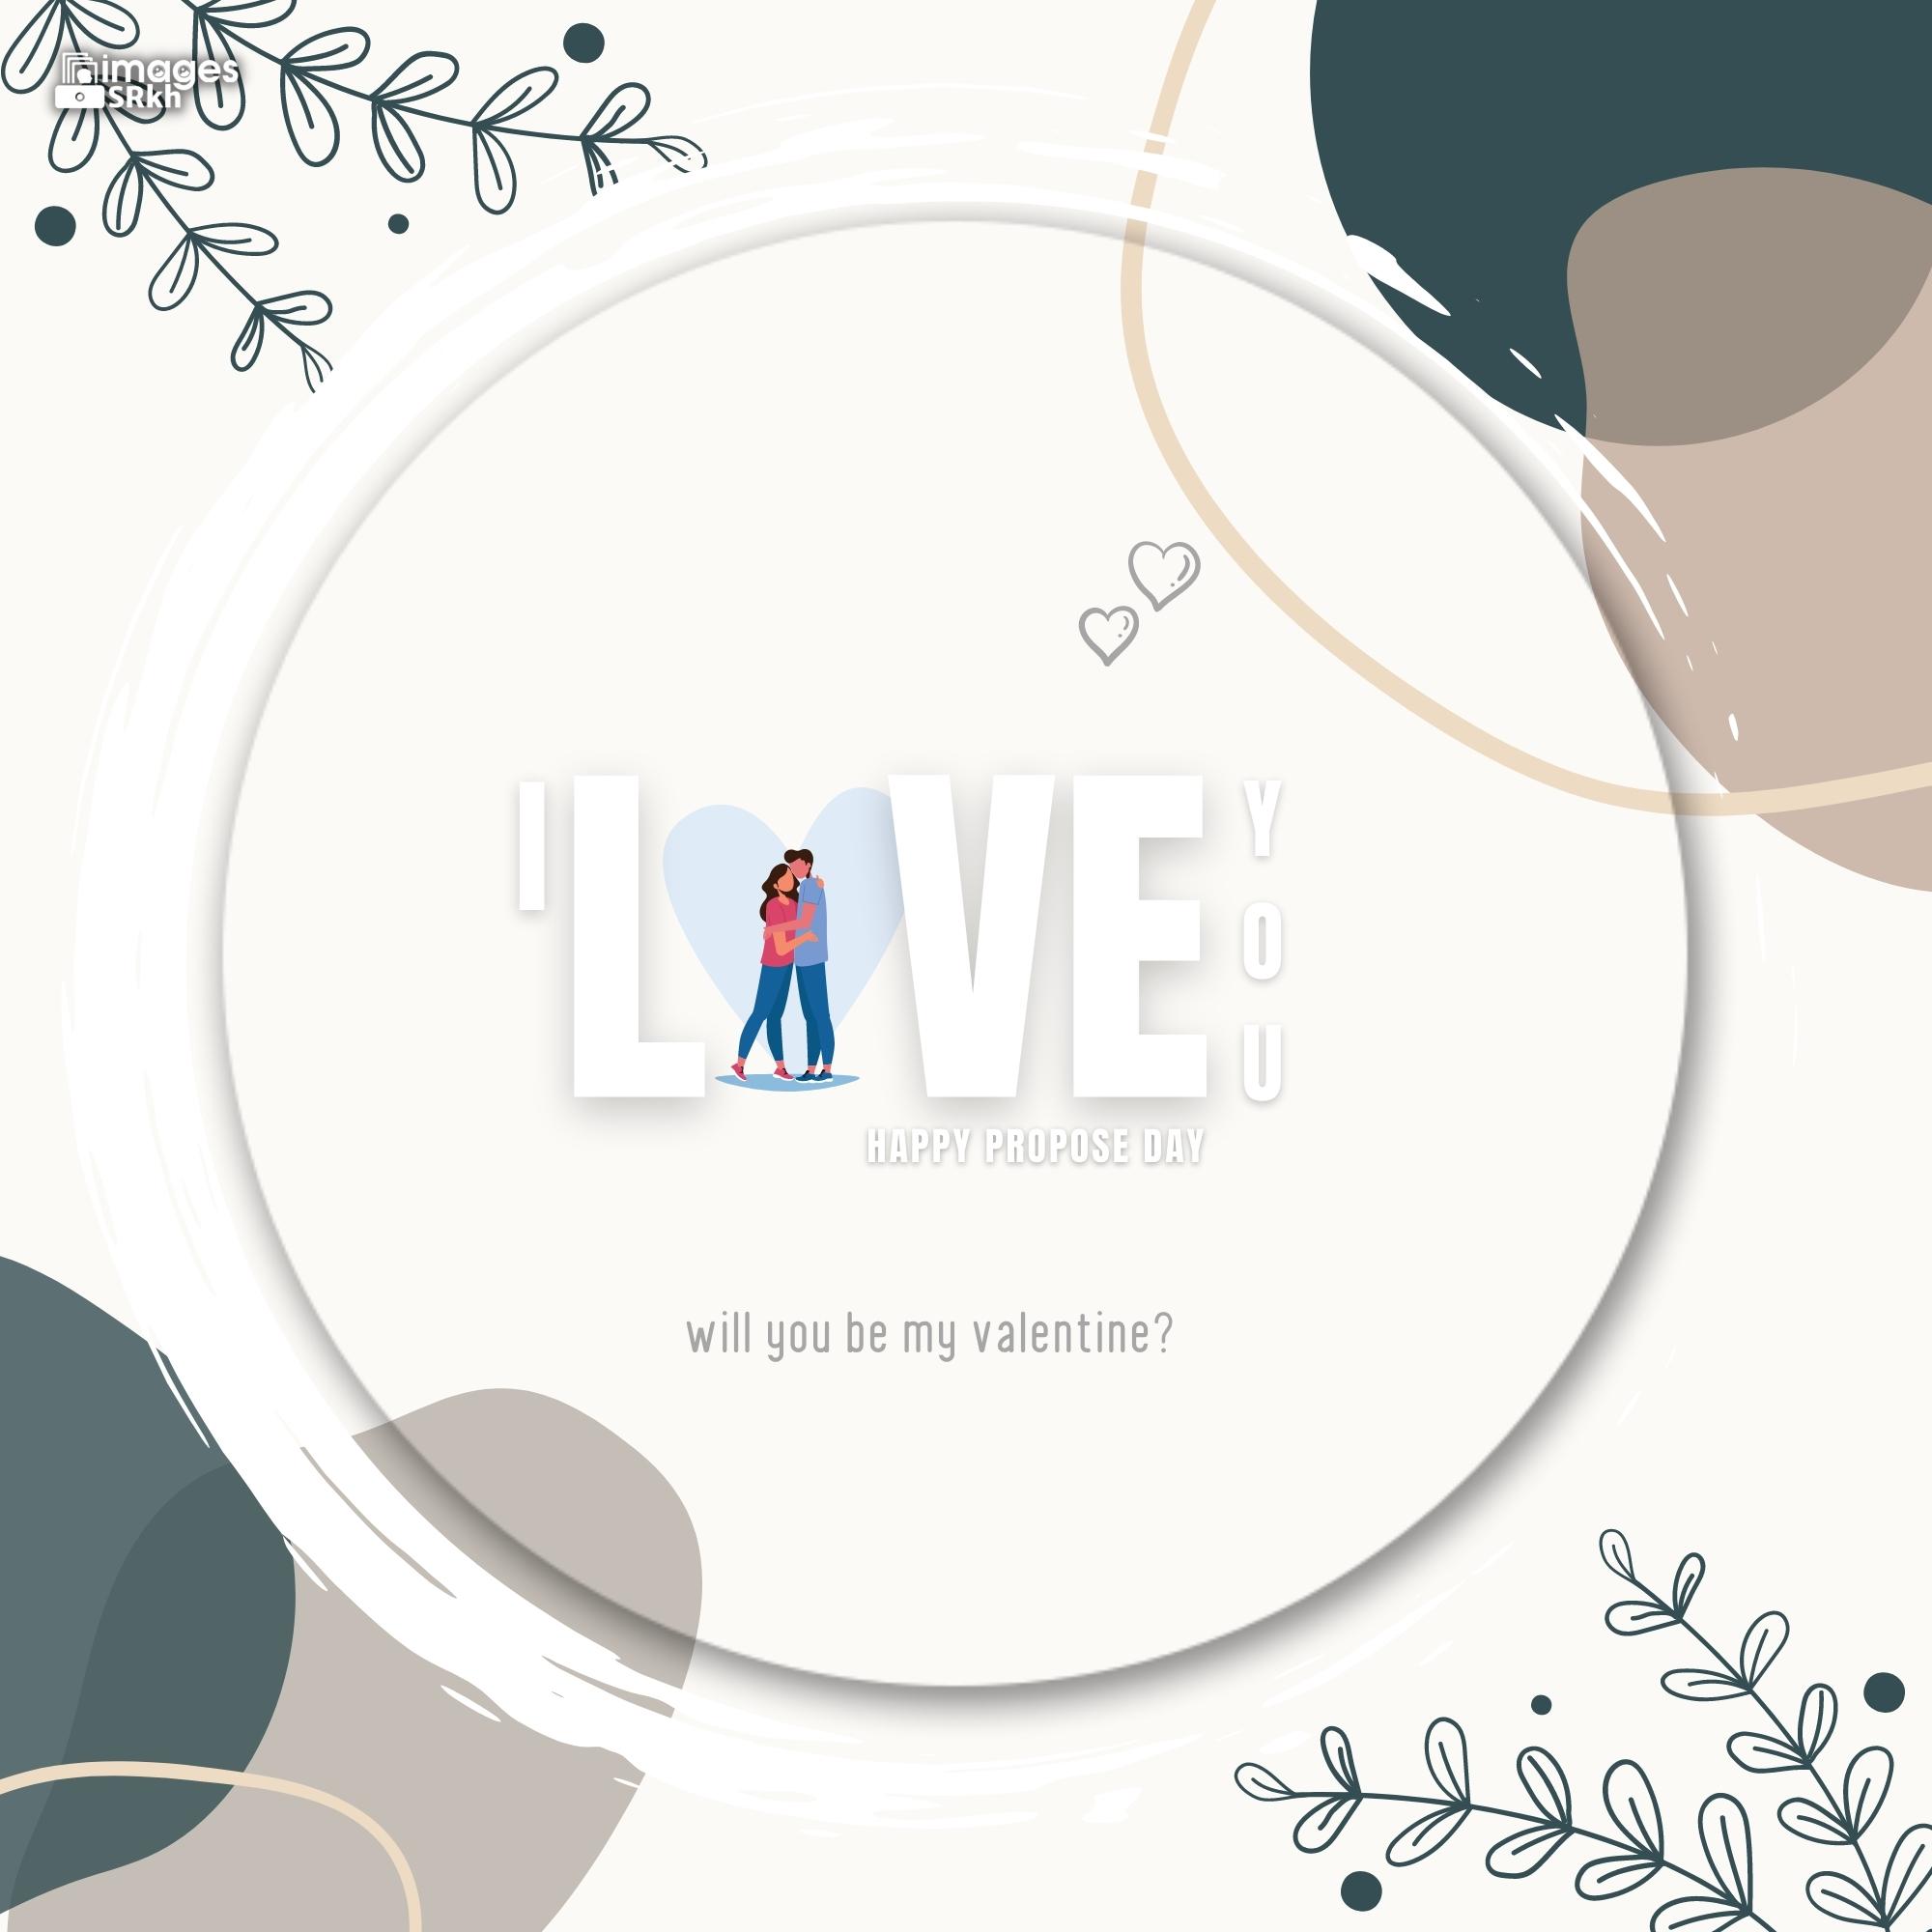 Happy Propose Day Images | 443 | I love you will you be my valentine